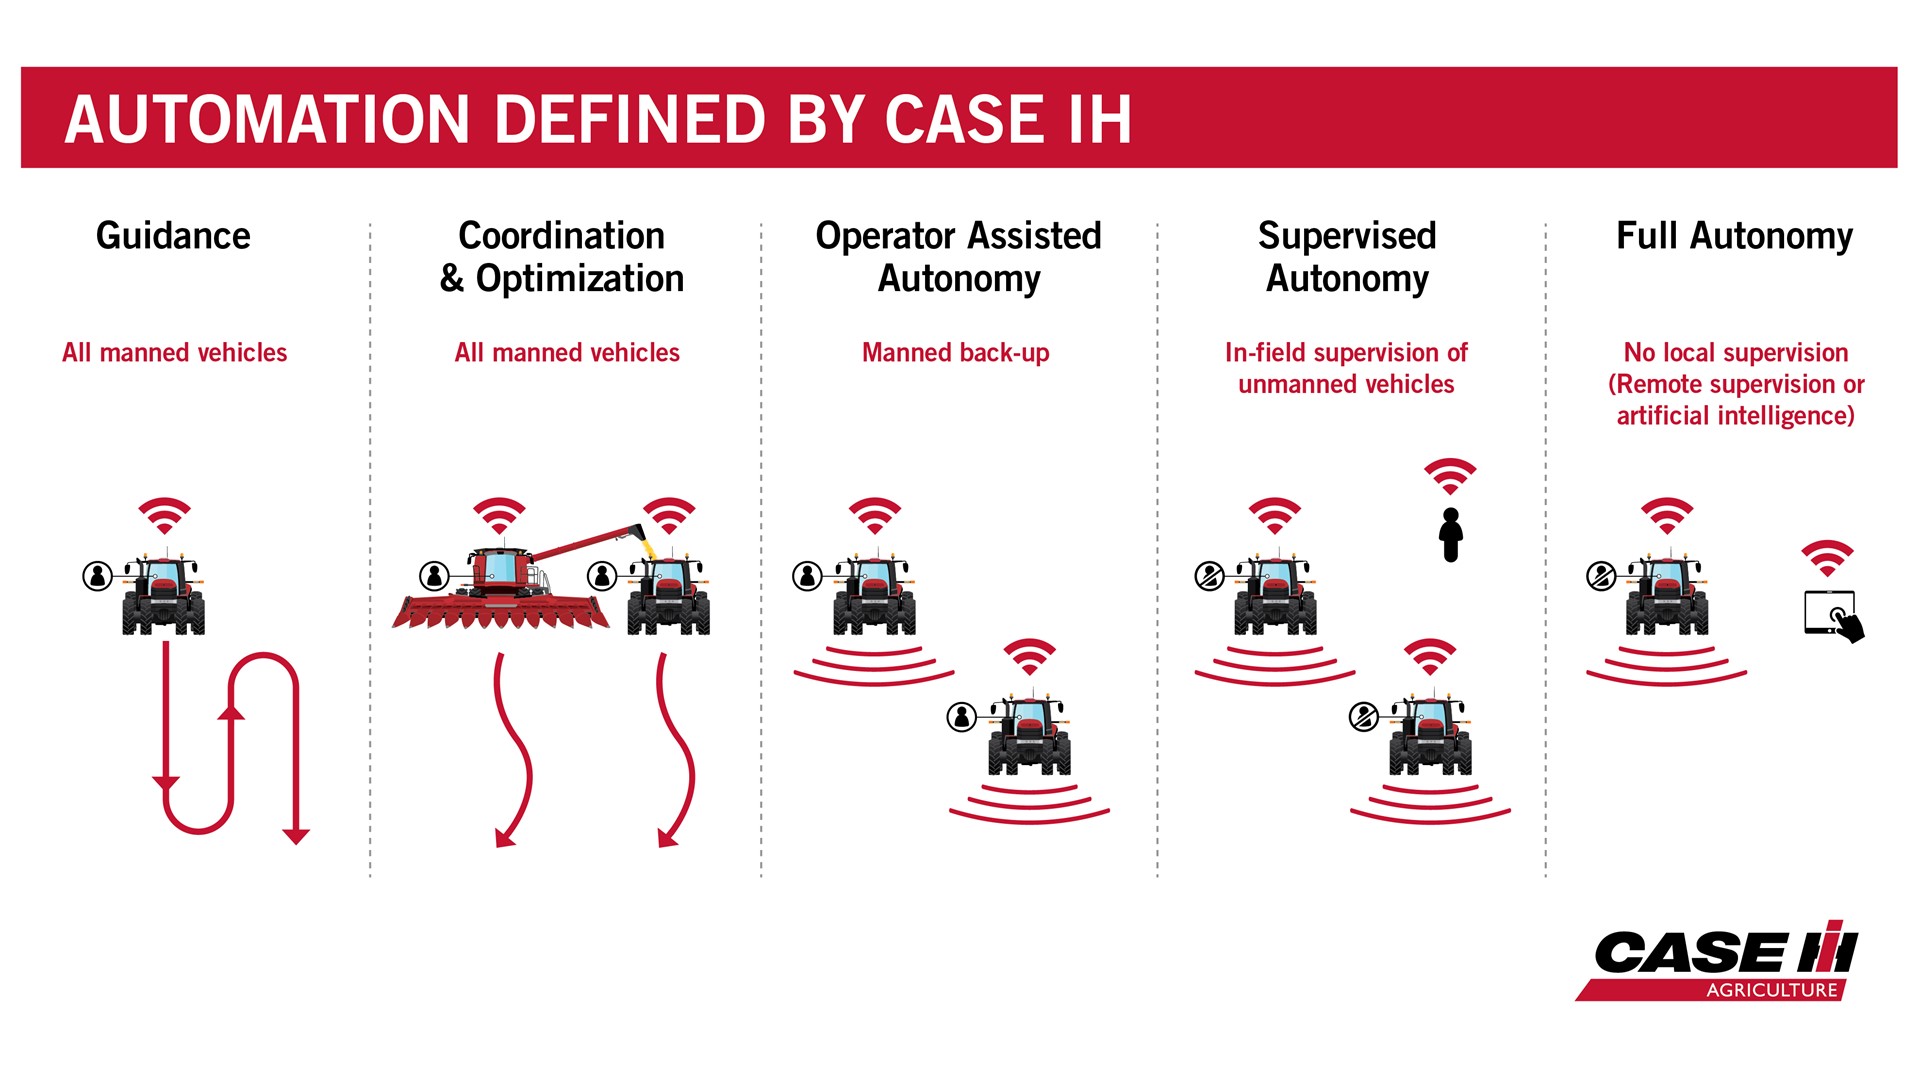 Case IH is defining new categories of autonomy and automation in agricultural field applications.